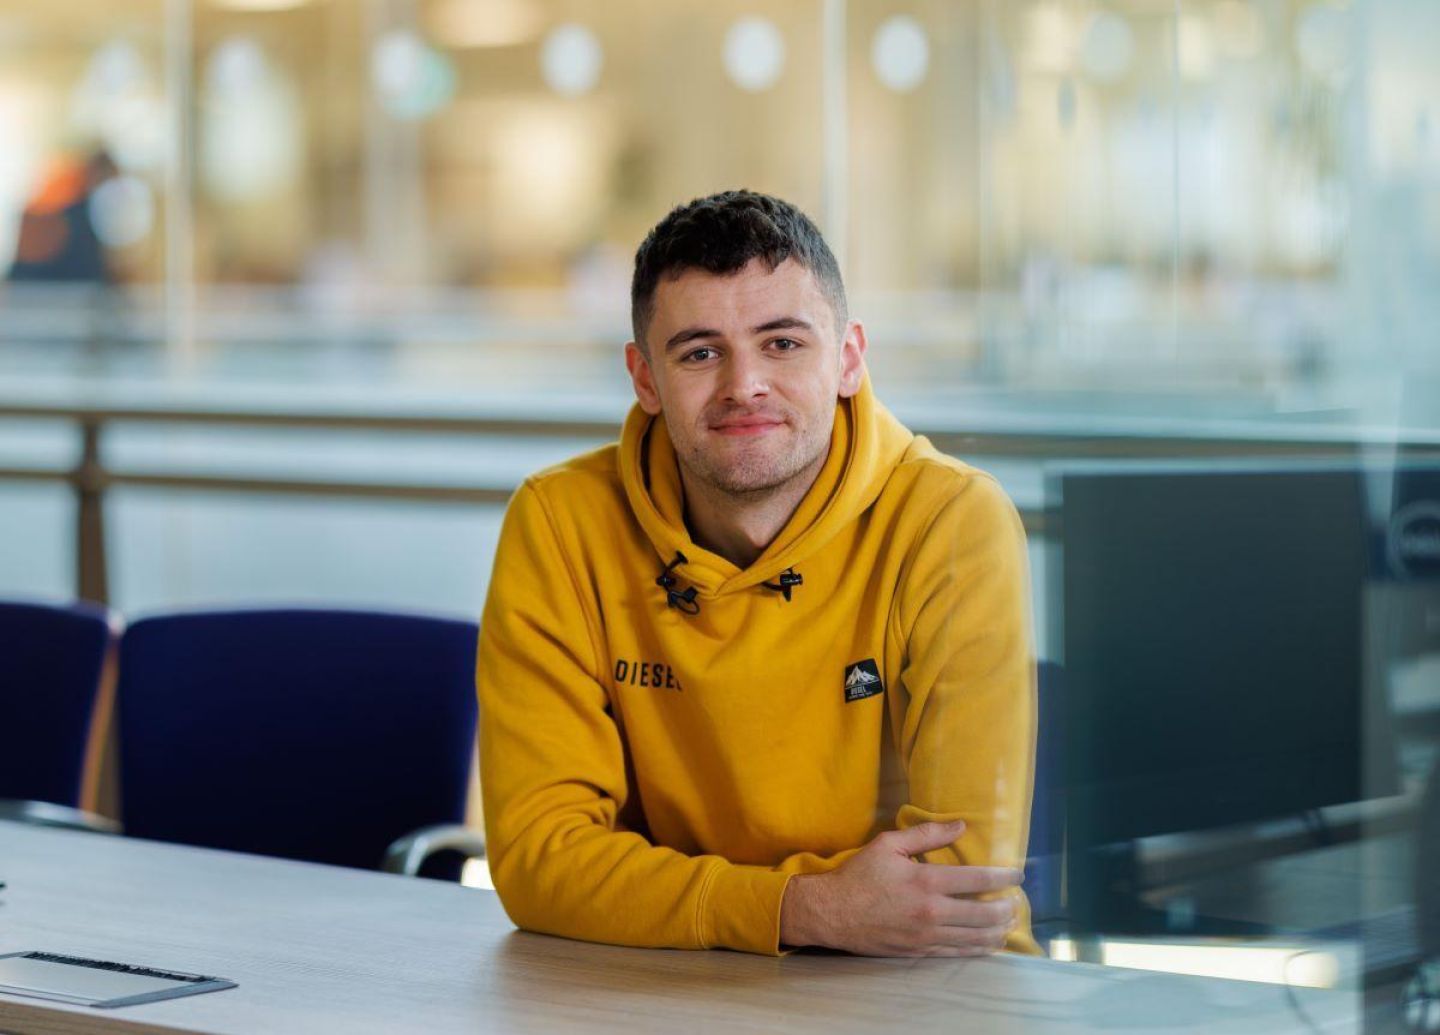 Alex was delighted to avail of high quality third level courses so close to home at SETU